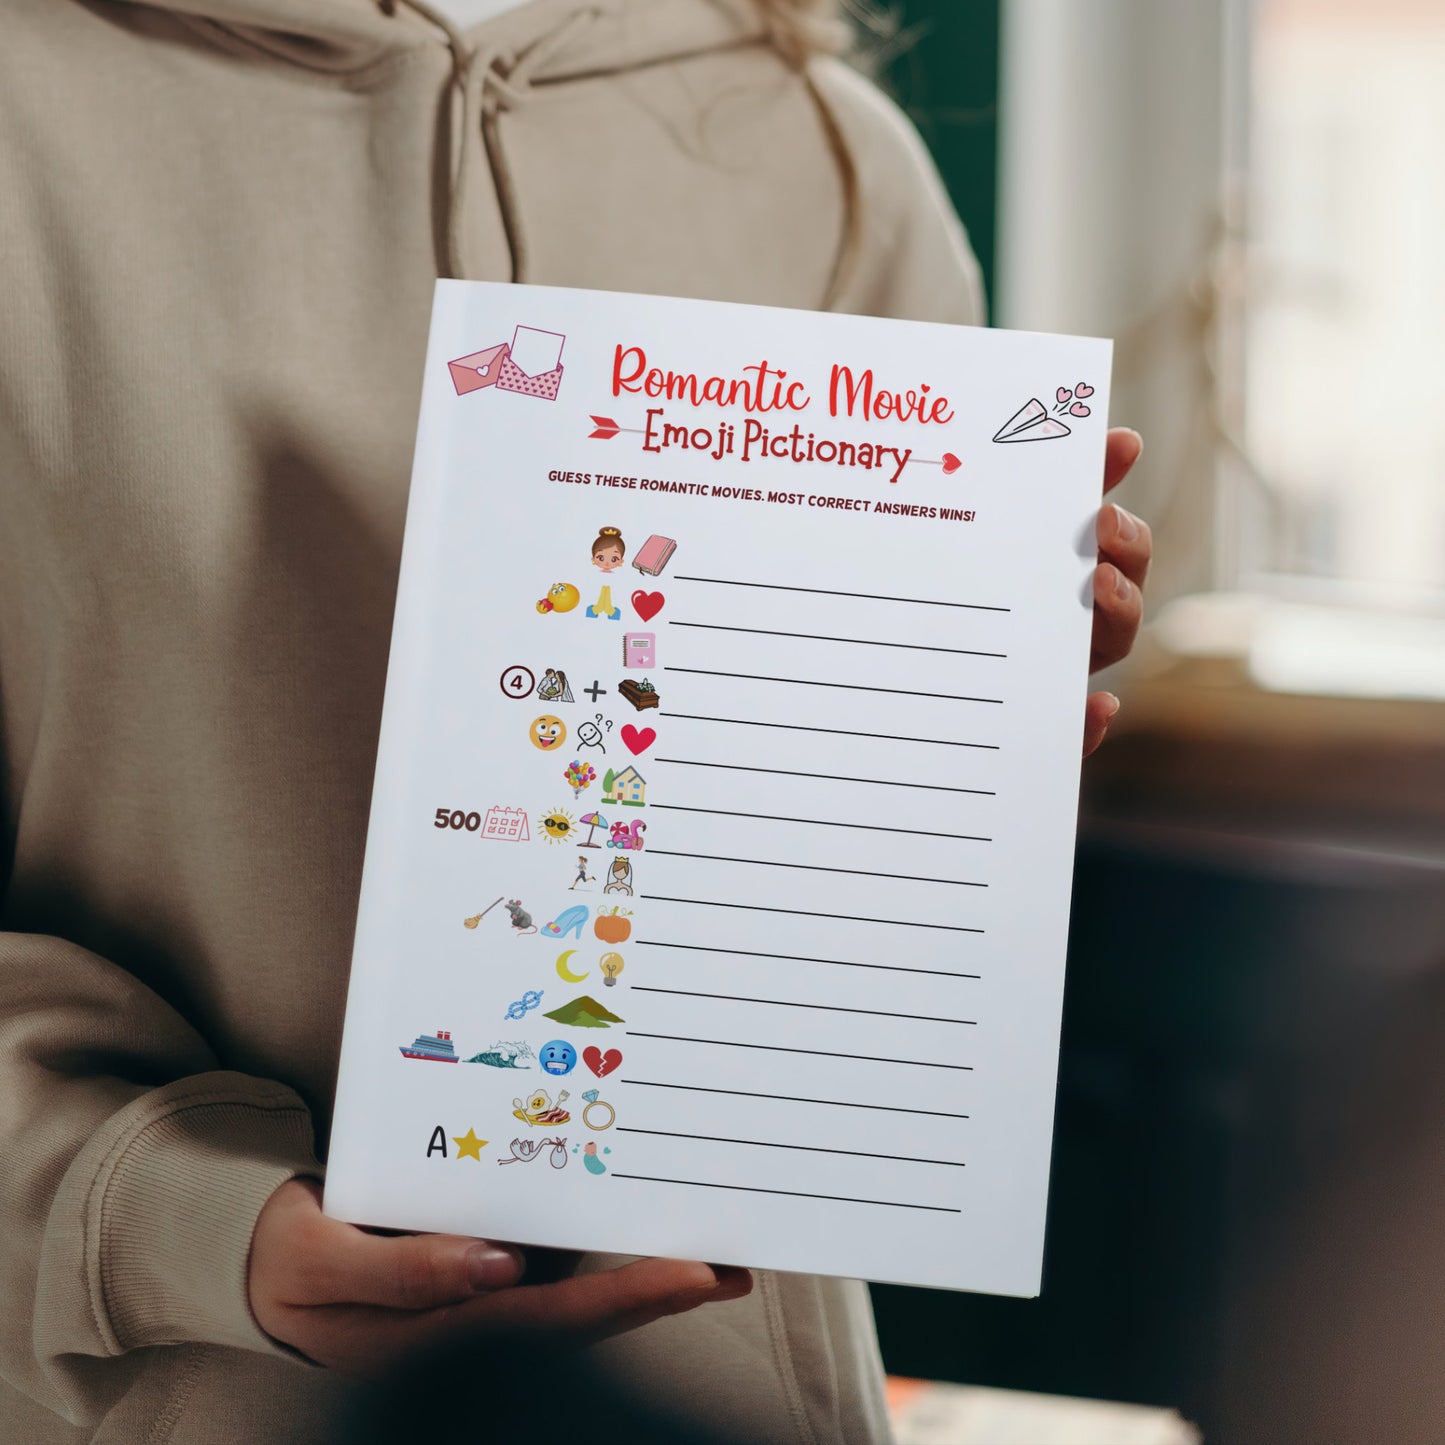 Valentine's Day Romantic Movie Emoji Pictionary Game Printable Activity, Fun Emoji Game Adults & Kids, Party Game, Galentines Day Games